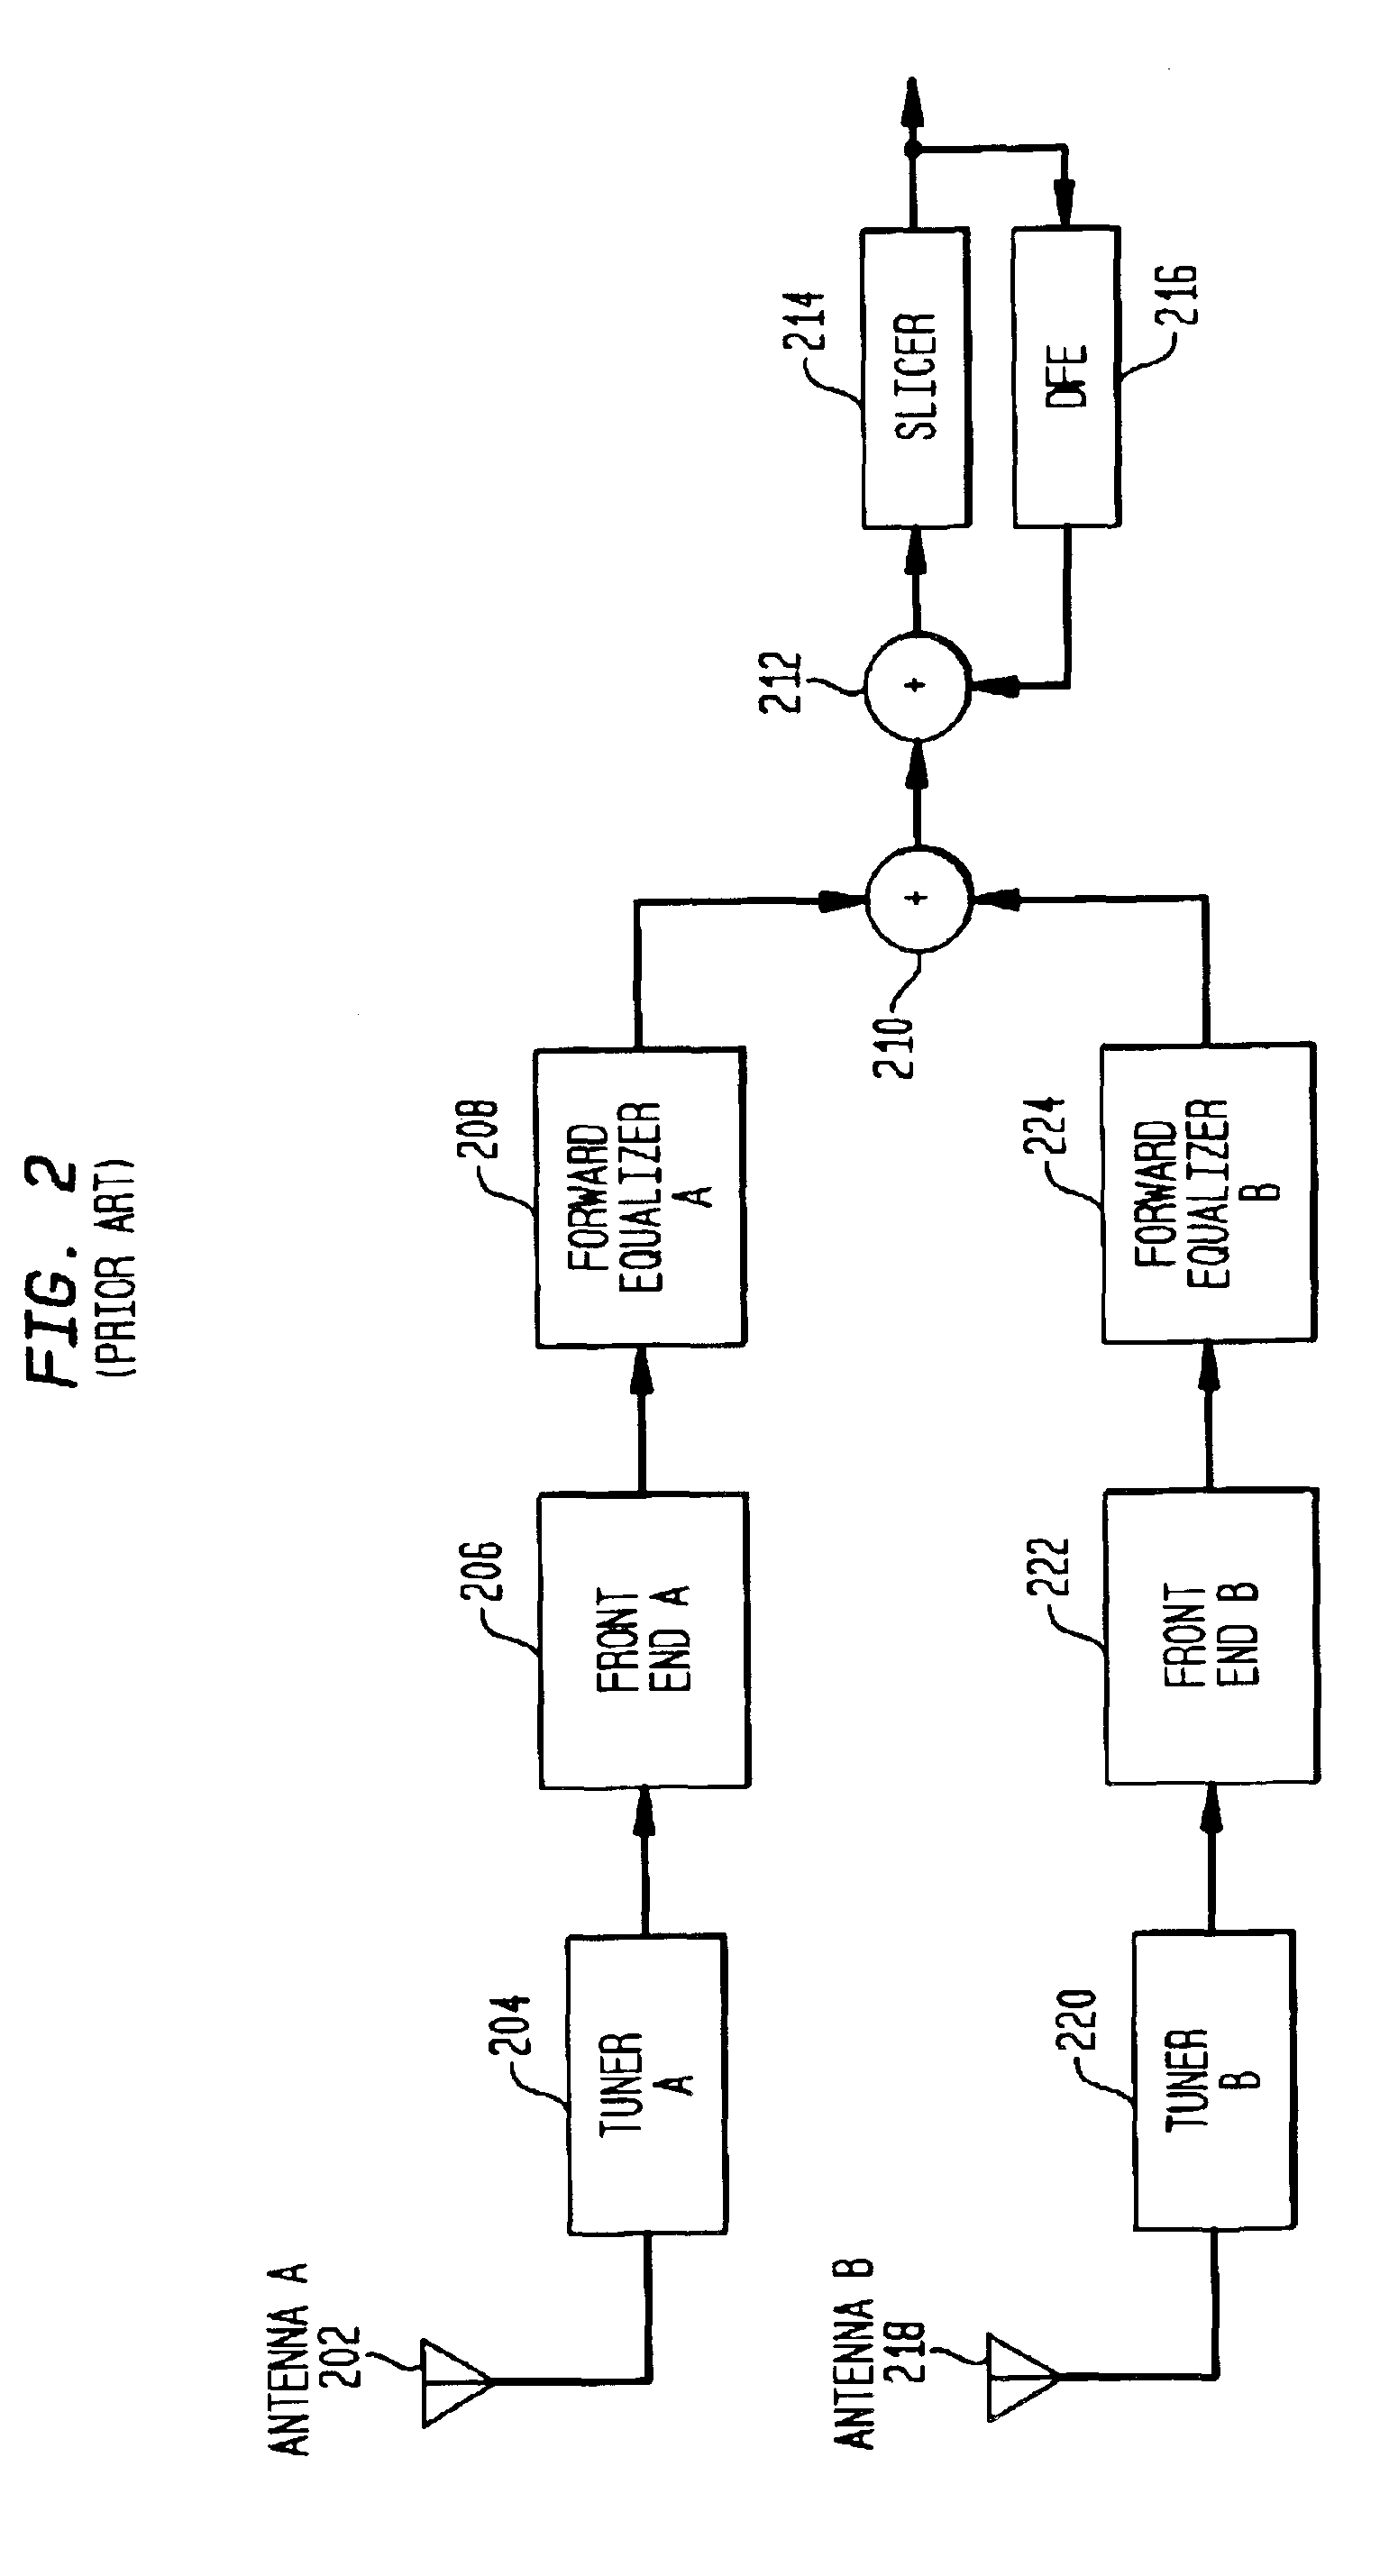 Diversity receiver with joint phase locked loop filter